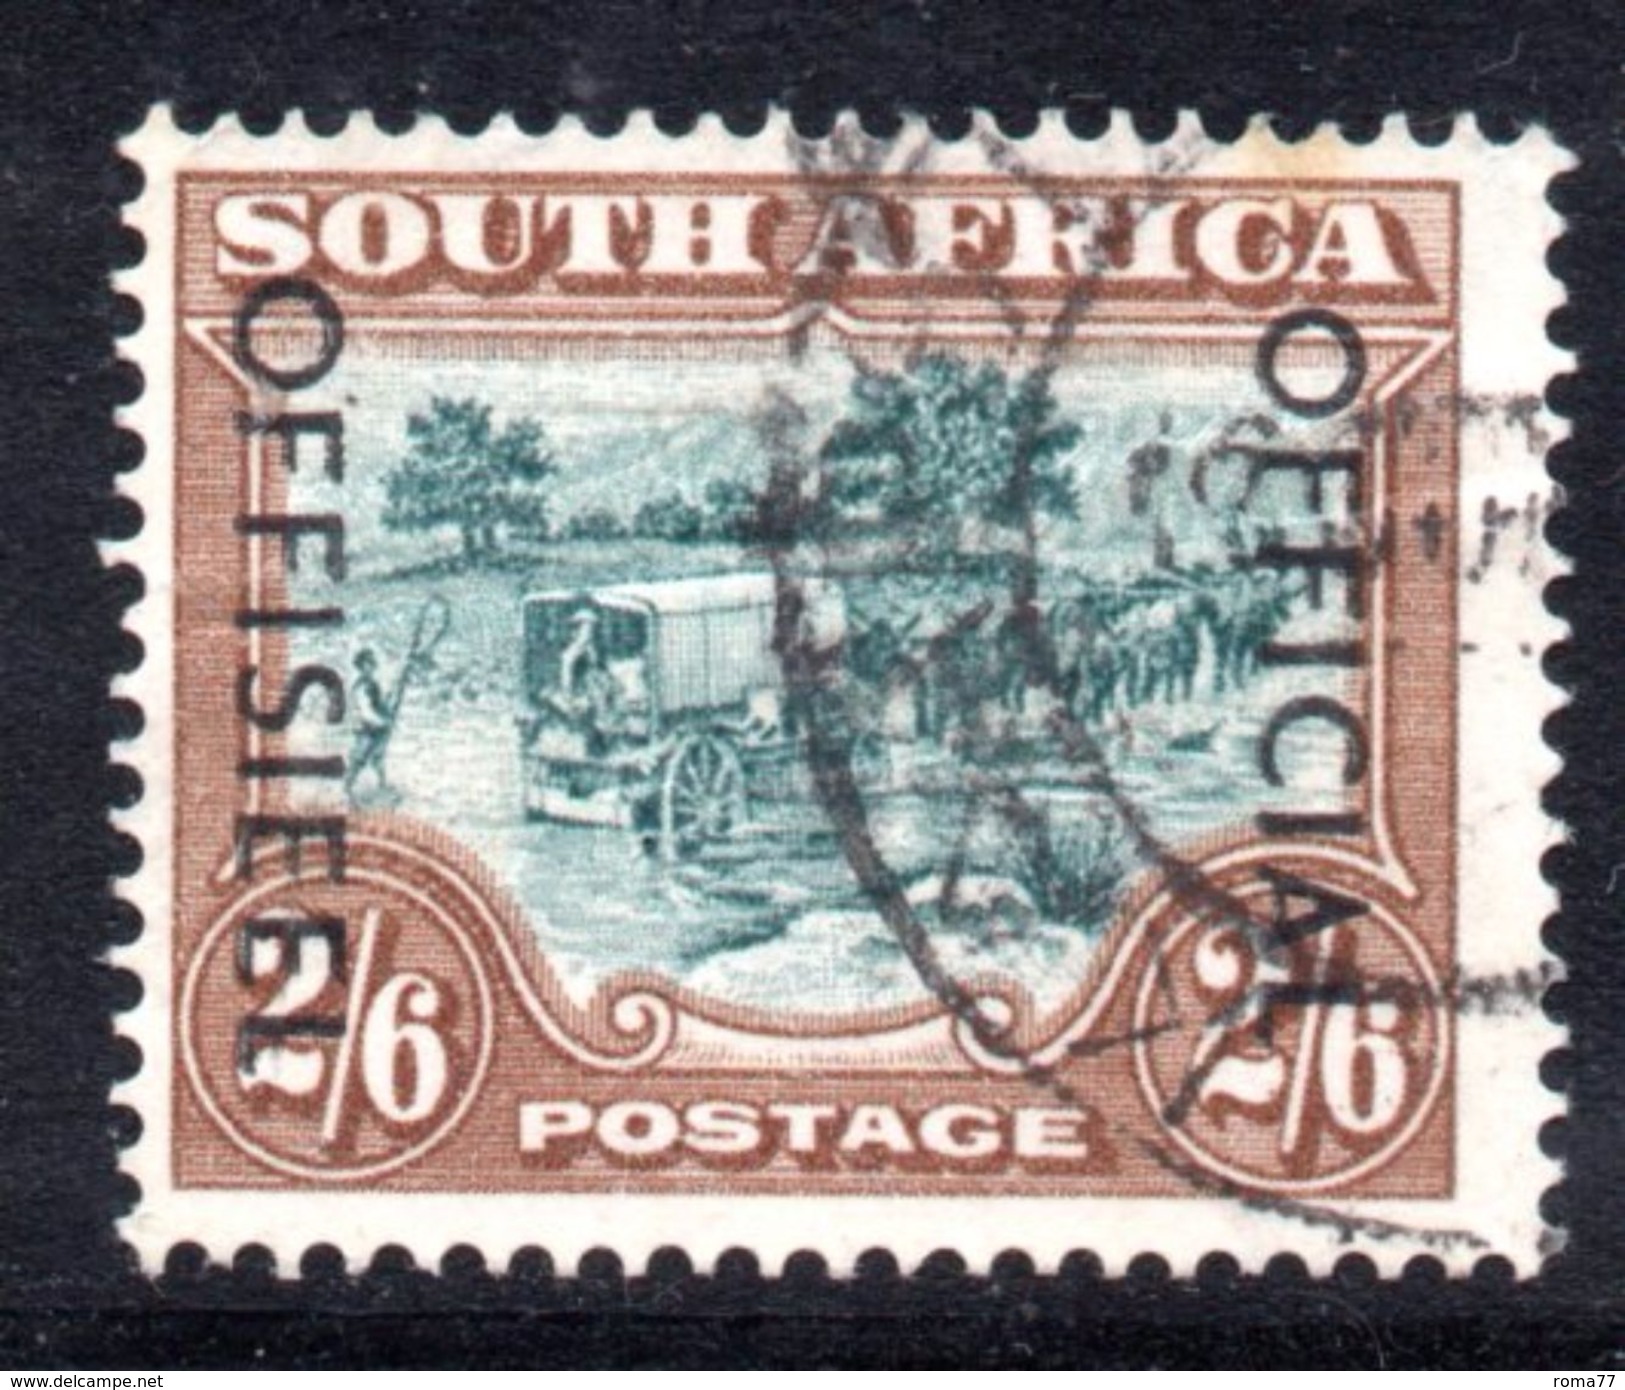 XP3206 - SOUTH AFRICA 1929/47 , Tasse Postage Due Il 2 Sh E 6 D. Usato . - Postage Due